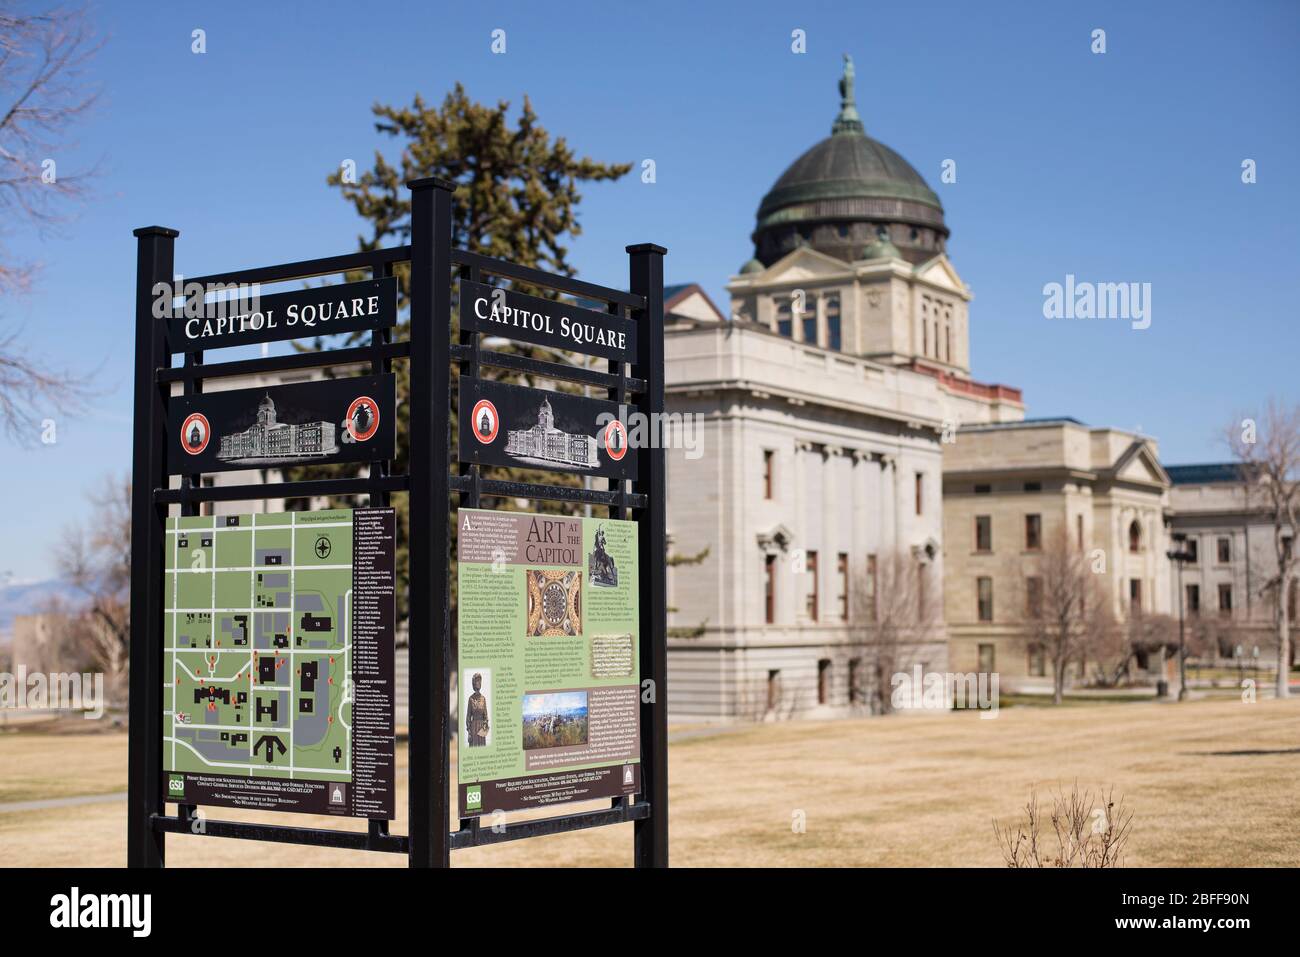 Helena, Montana - April 8, 2020: State Capitol of Montana map and direction sign for the Capitol Square. Stock Photo